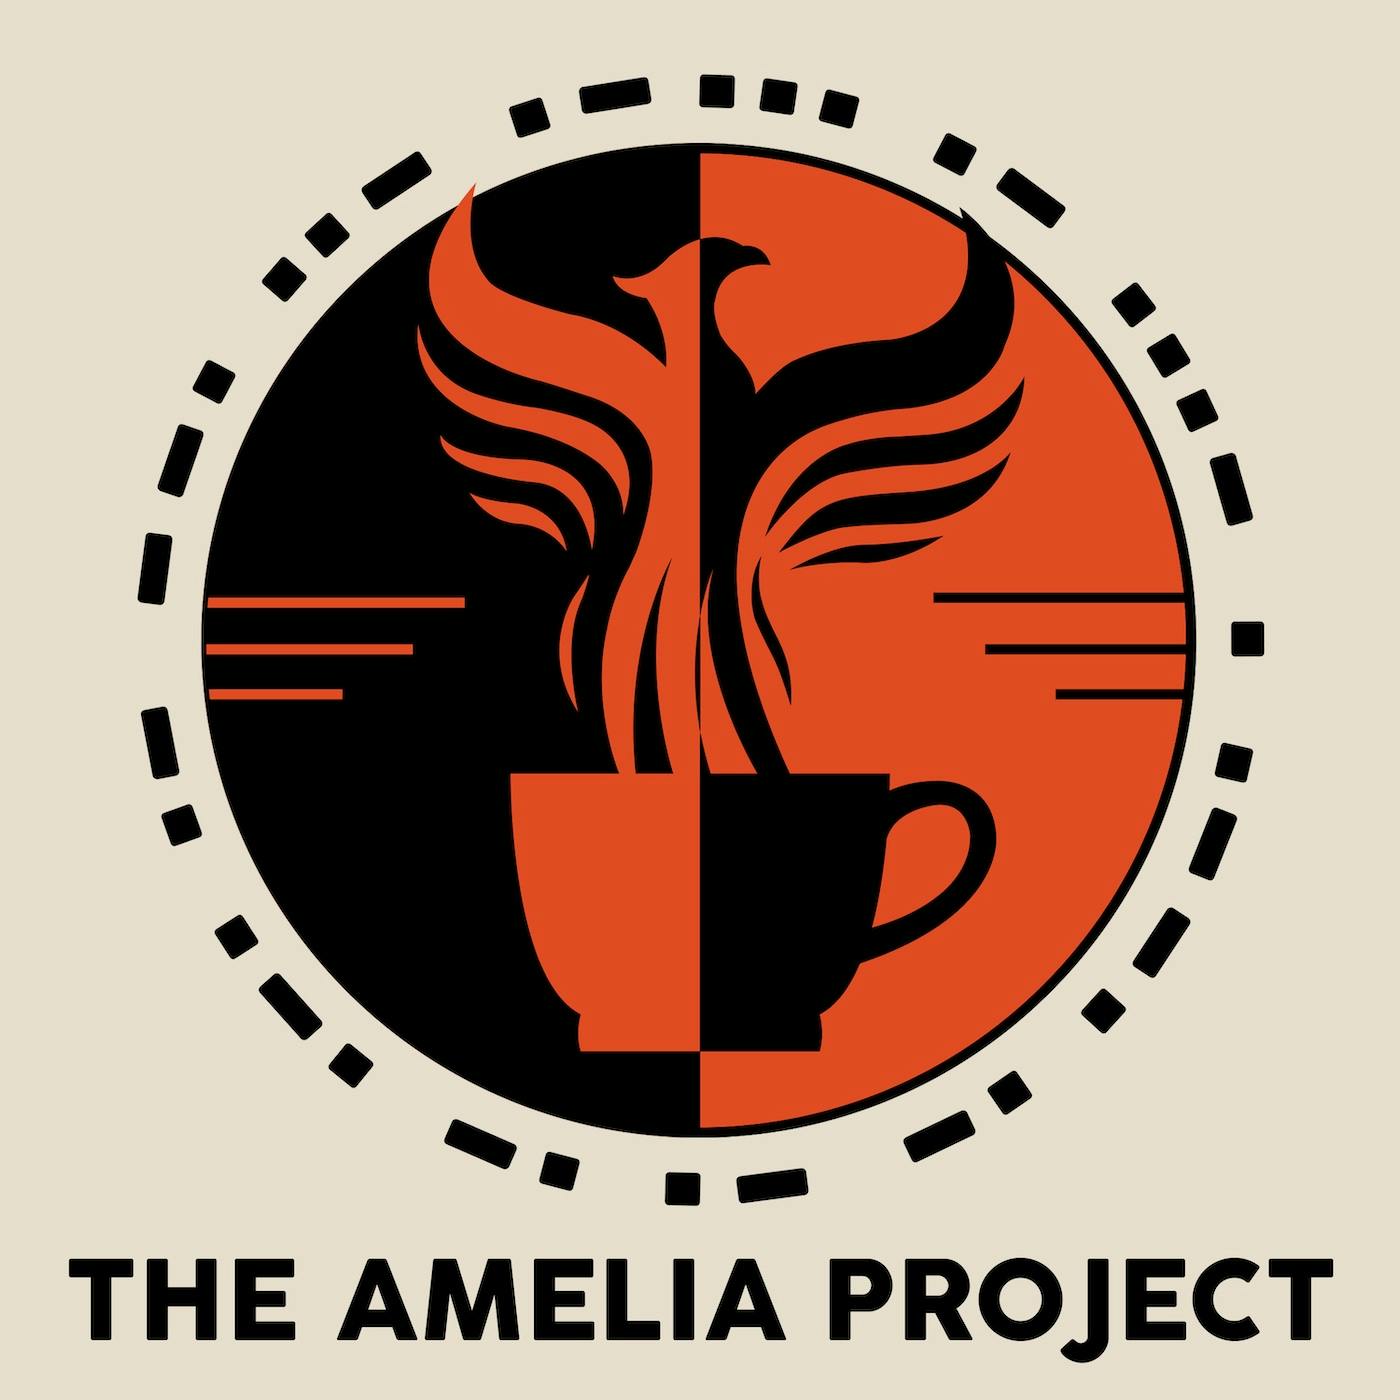 Presenting: The Amelia Project (with crossover sketch!)